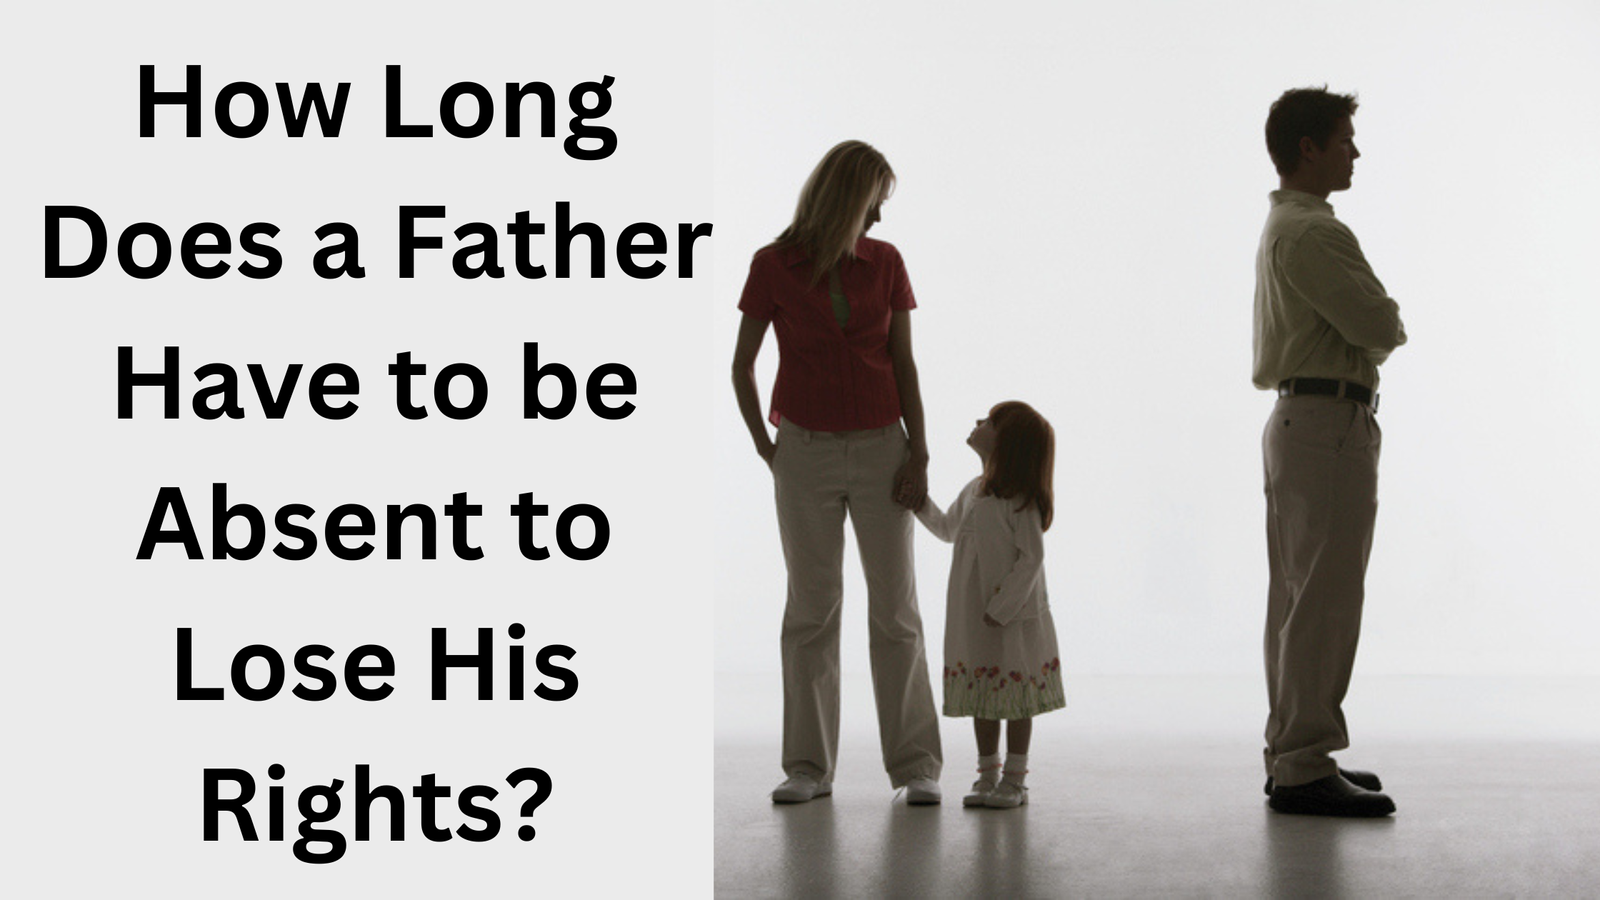 How Long Does a Father Have to be Absent to Lose His Rights?